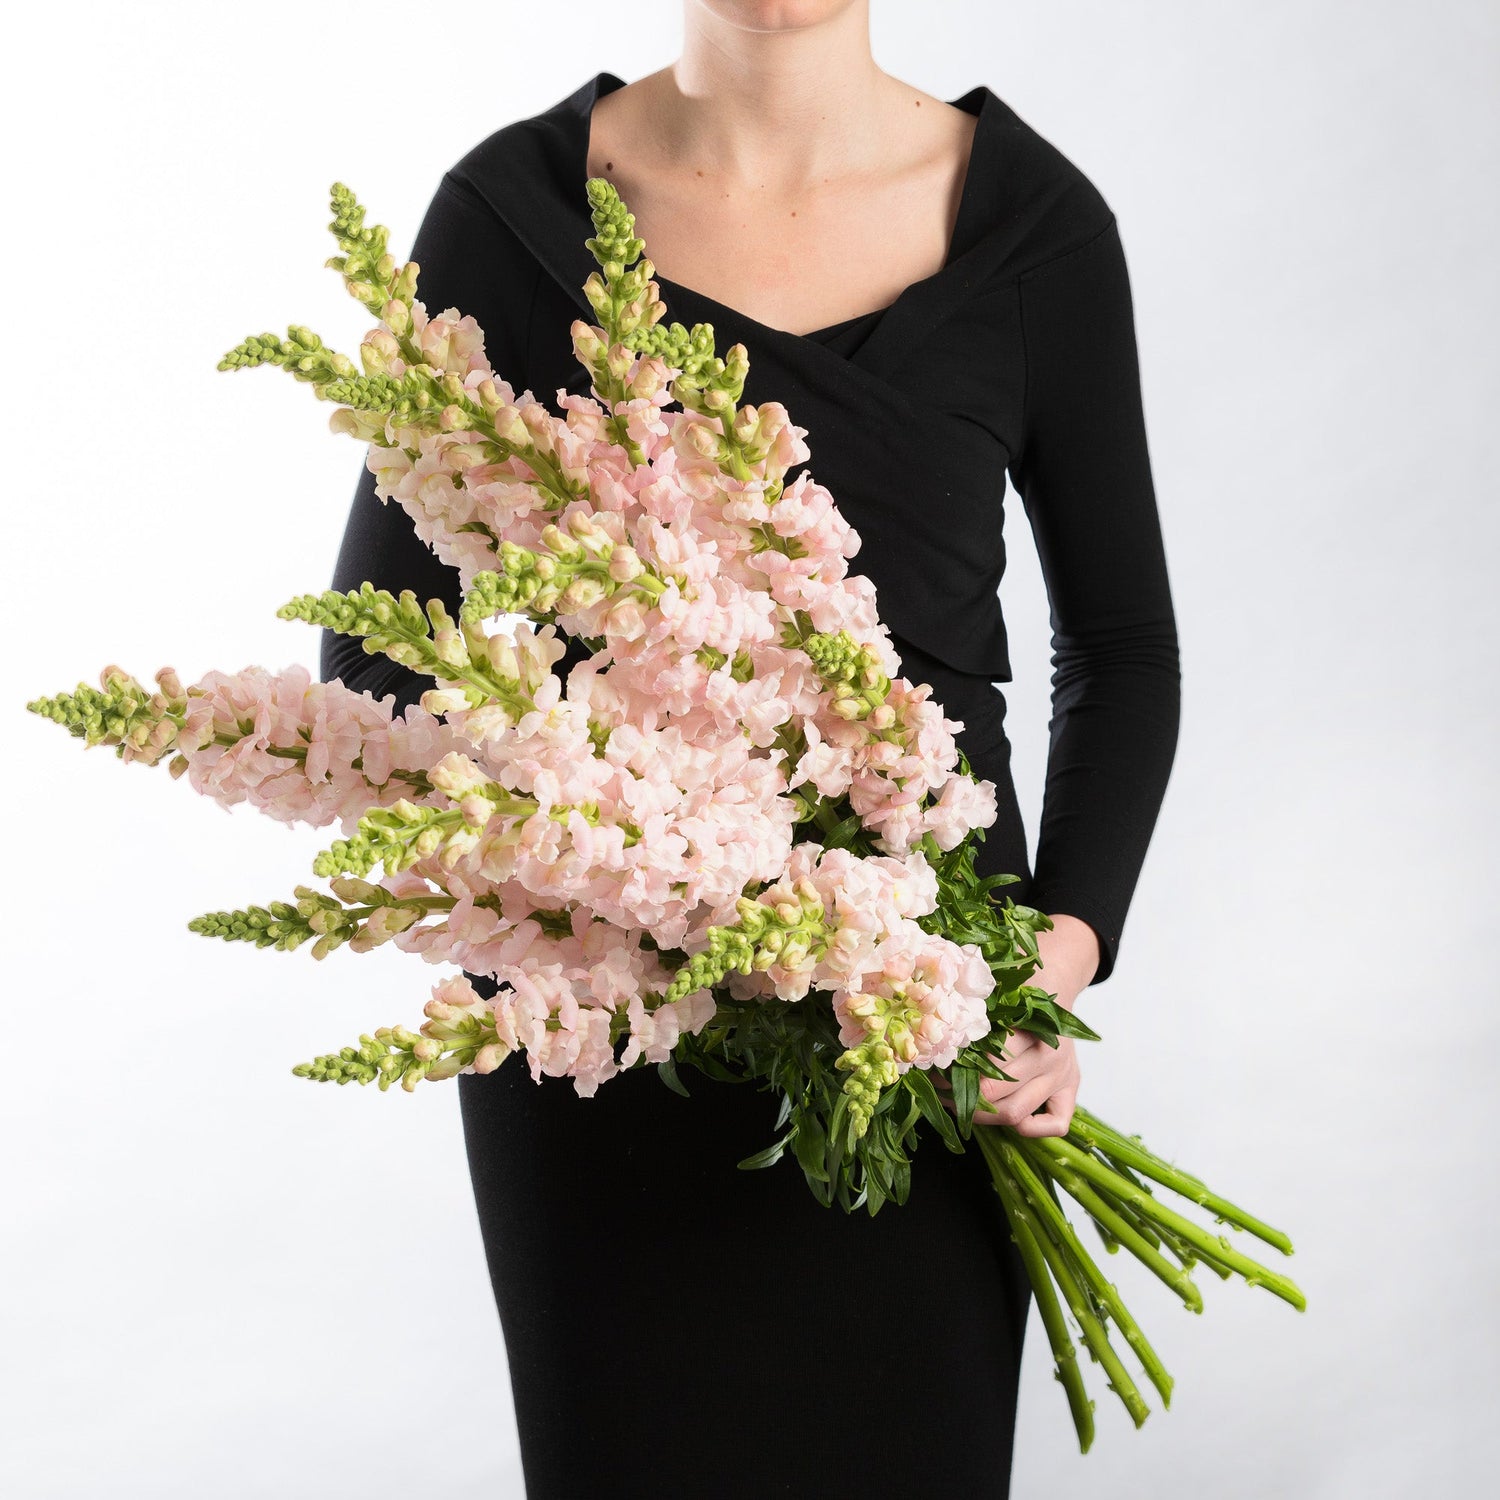 A woman wearing black holding a bouquet ot soft pink snapdragon flowers in a bouquet.